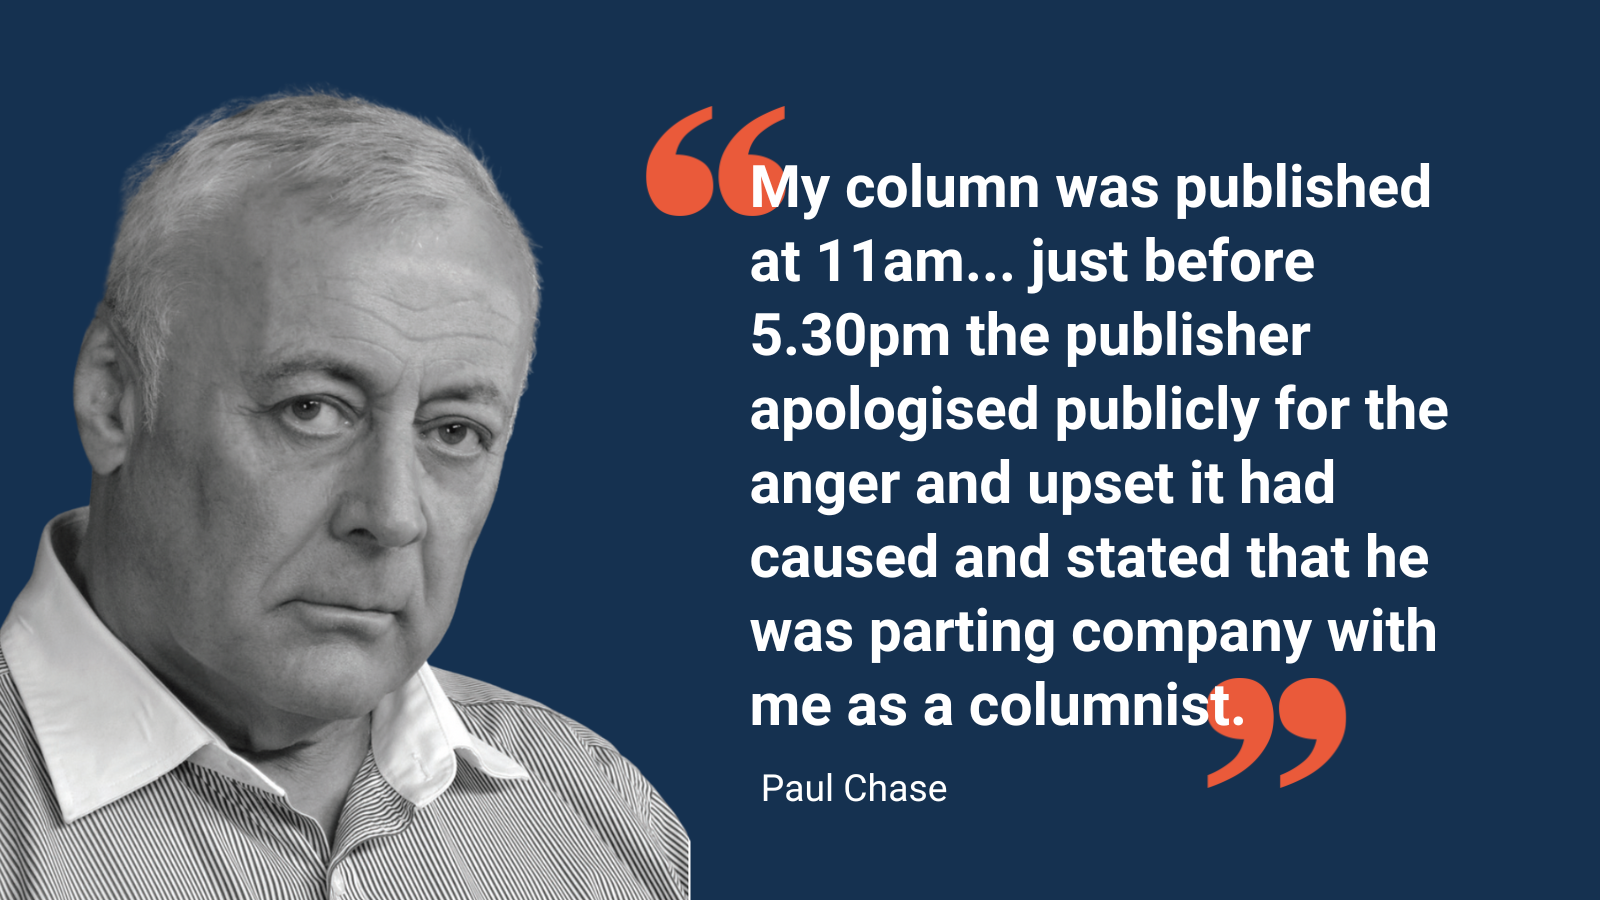 "My column was published at 11am... just before 5.30pm the publisher apologised publicly for the anger and upset it had caused and stated that he was parting company with me as a columnist."